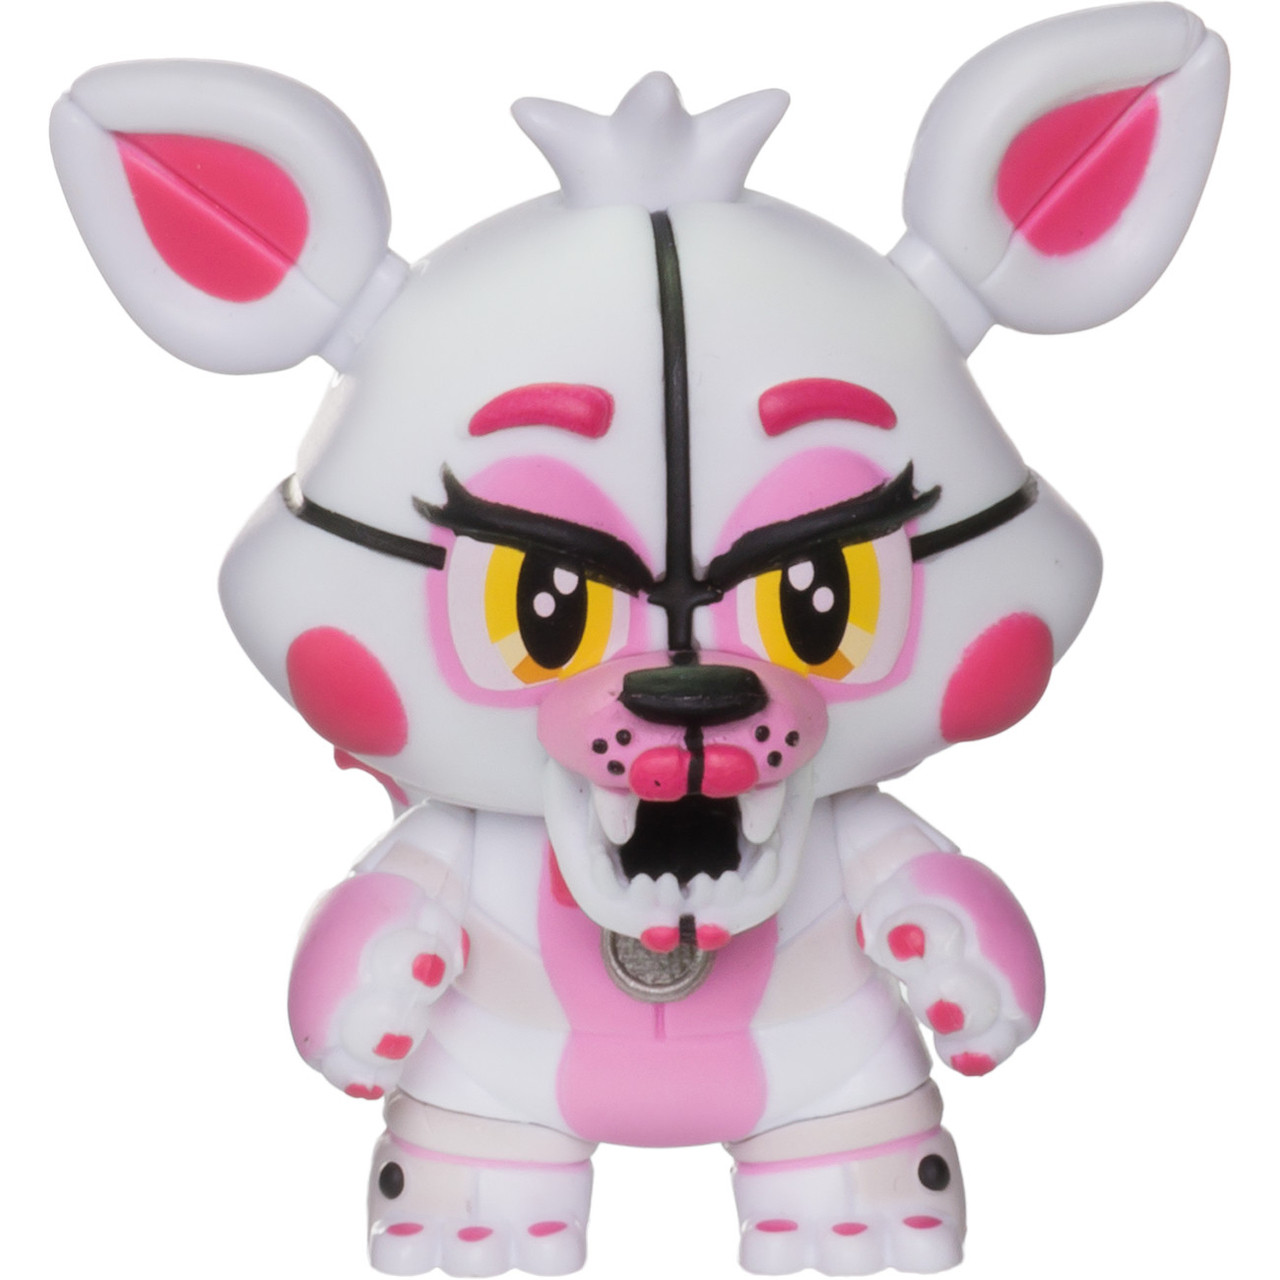 FNAF Five Night's at Freddy's Sister Location Funko Mystery Minis You Pick